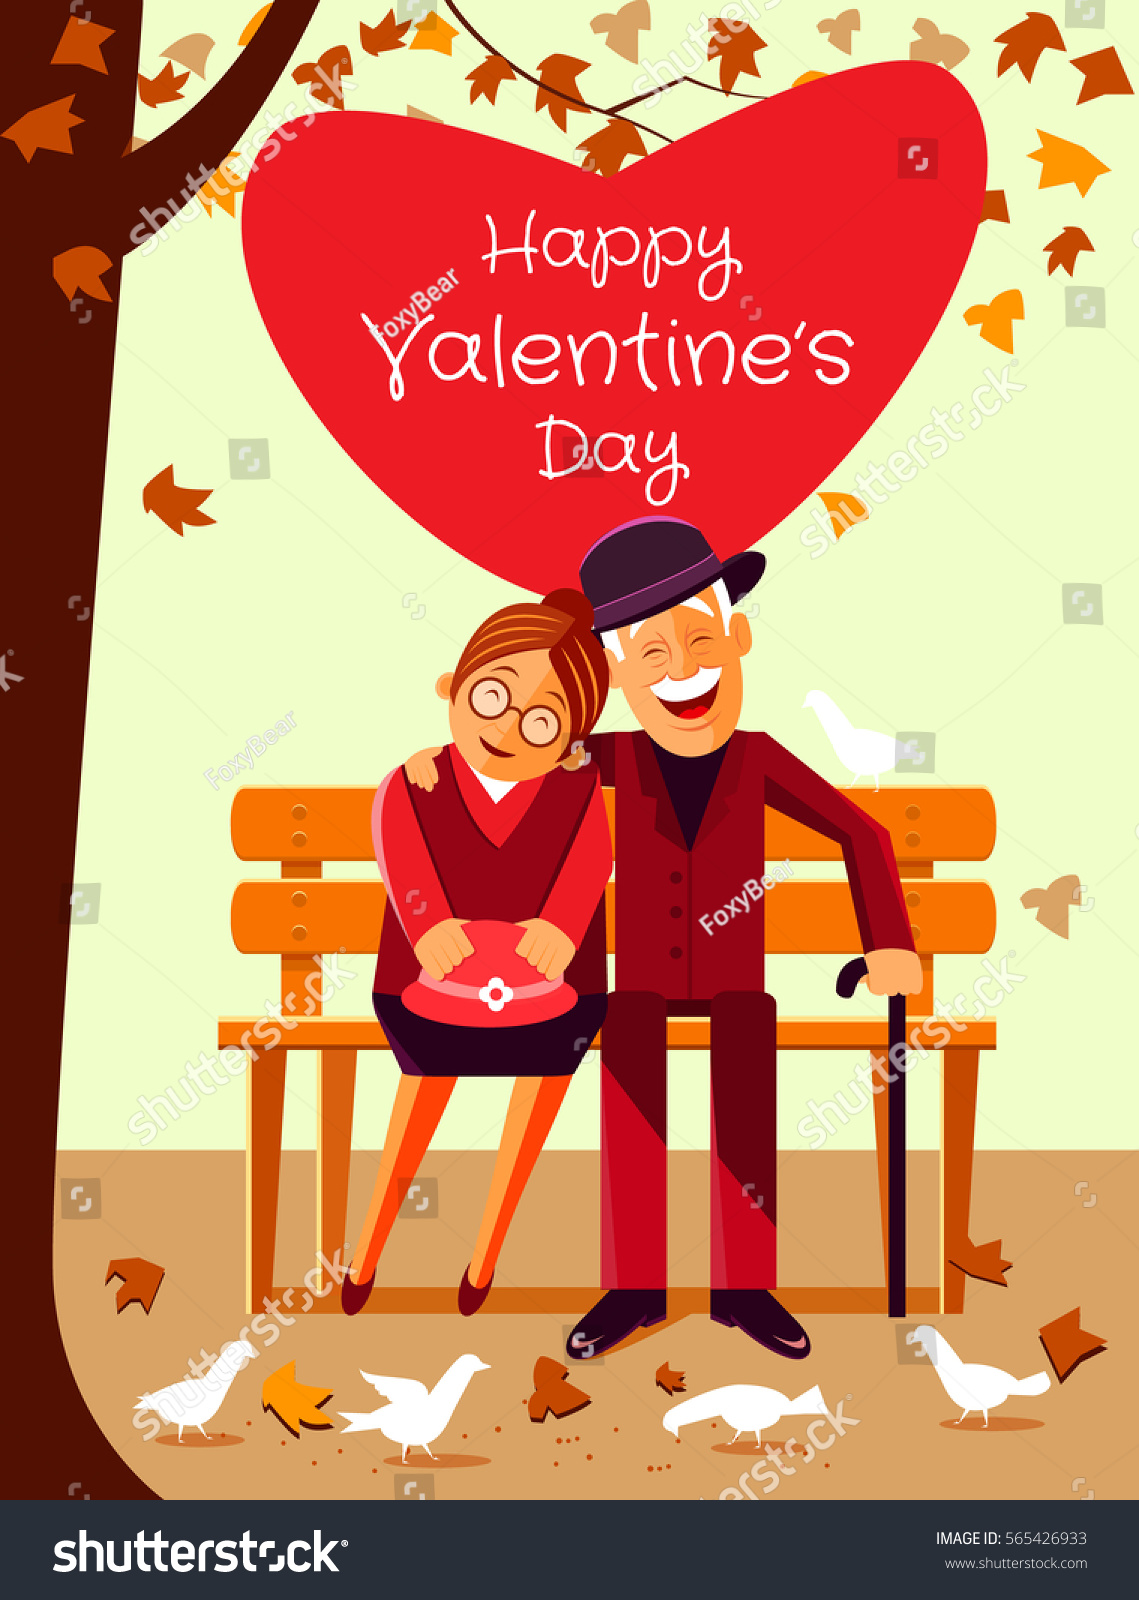 Download Valentines Day Greeting Card Illustration Happy Stock Vector Royalty Free 565426933